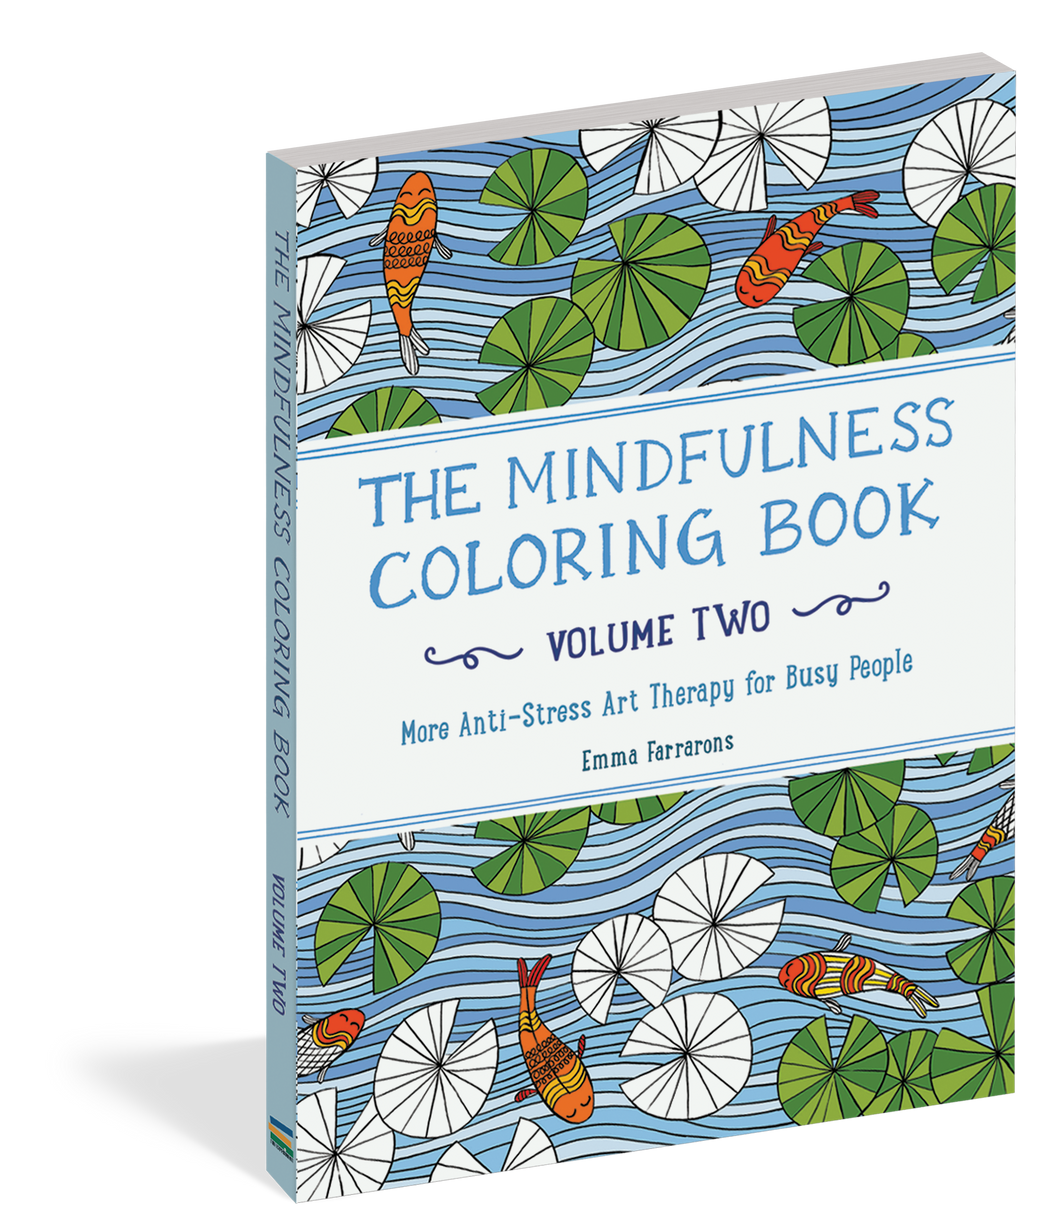 Mindfulness Coloring Book Volume Two